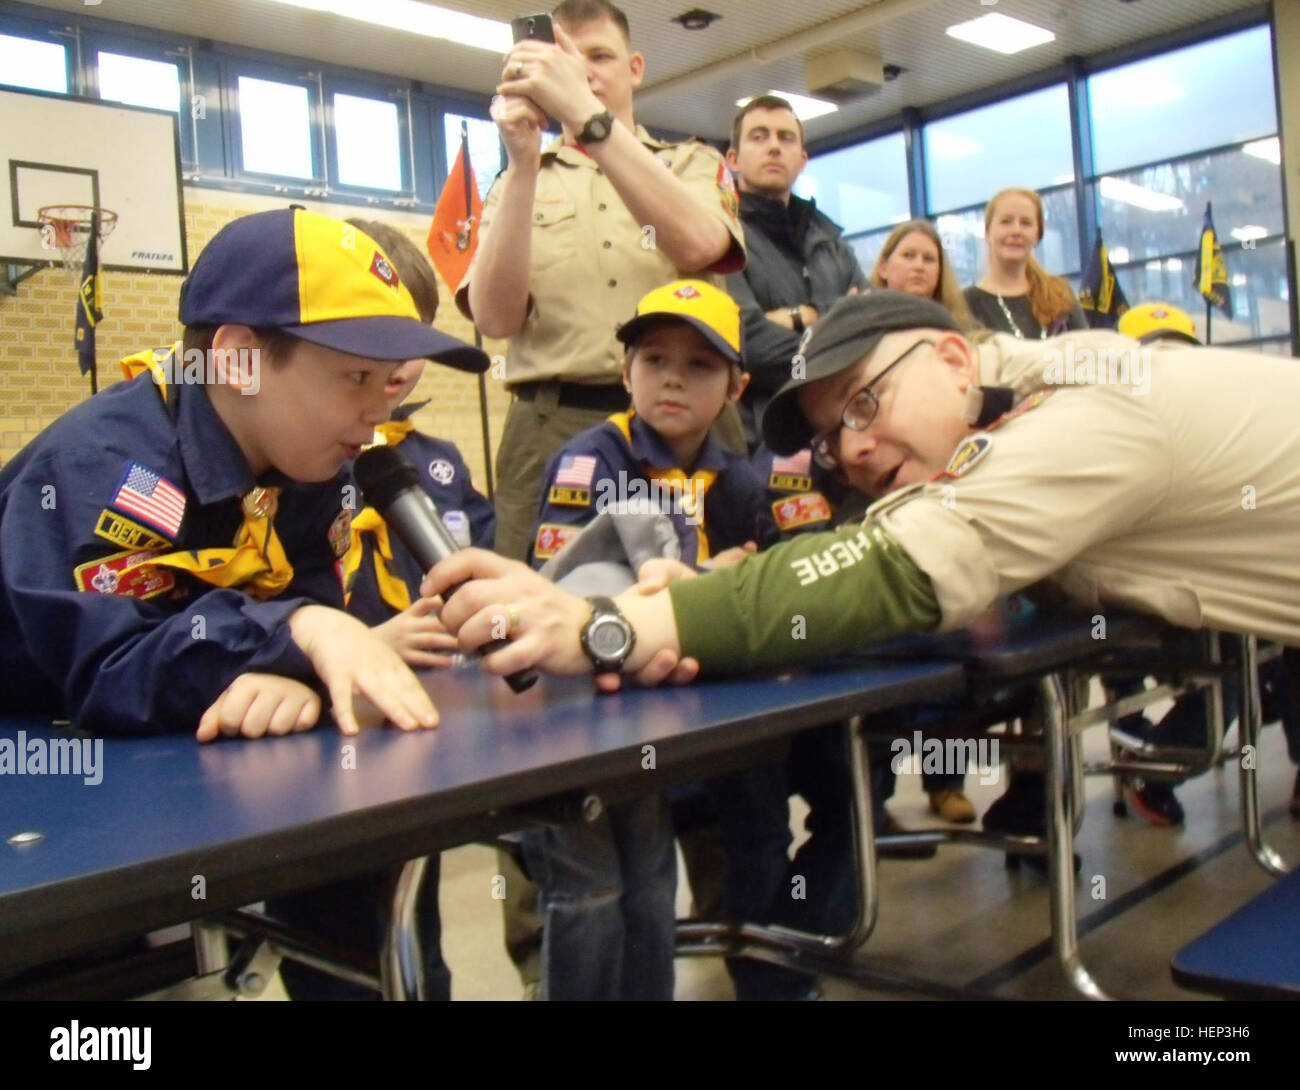 Maj. Michael J. Swienton, the Pack 69 cubmaster, or senior pack leader, “interviews” Wolf Scout Allen Jarvis from the “pit” during the Pack 69 Pinewood Derby held Jan. 24 at Vogelweh Elementary School. In addition to his administrative roles, the versatile Wisconsin native served as emcee and “roving reporter,” conducting “Laugh Olympics”-style question-and-answer sessions to inspire analysis, constructive thought and presentation skills between heats. Some Scouts attributed their success to advanced aerodynamics or interstellar inspiration while others candidly acknowledged their parents’ rol Stock Photo